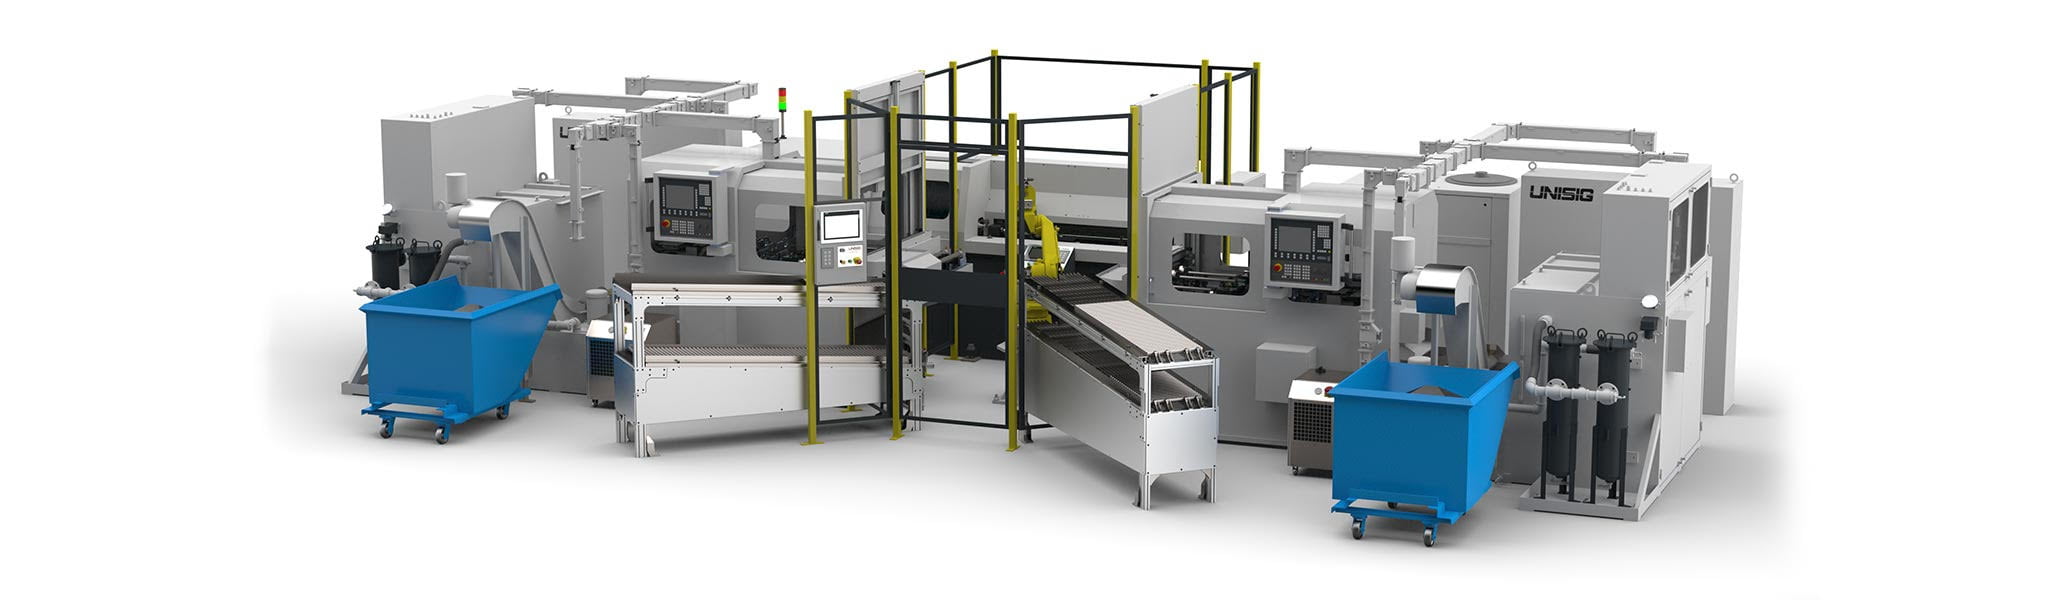 Rendering of a new manufacturing cell for Vortakt